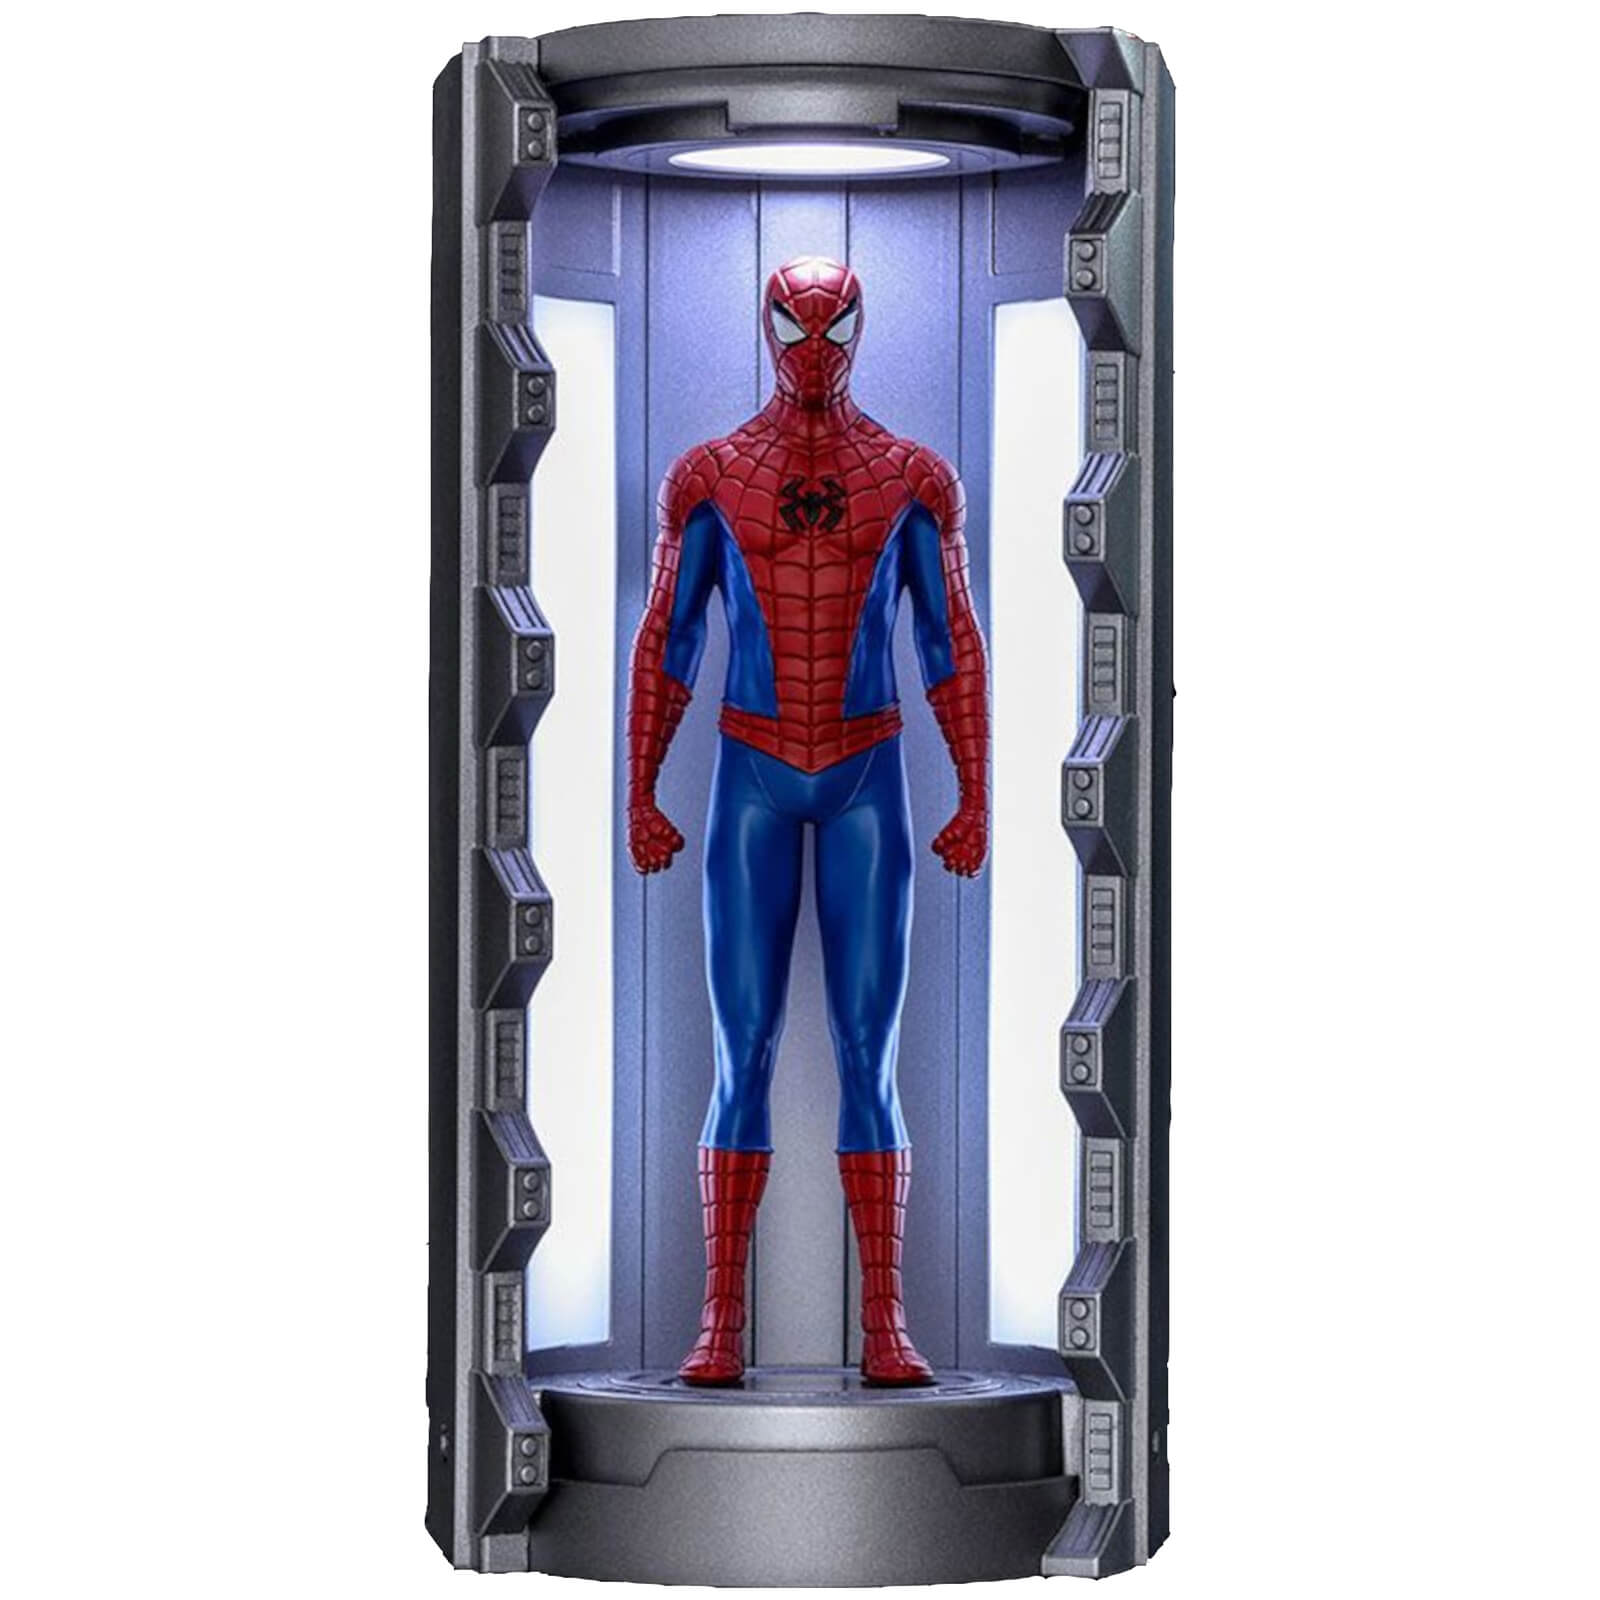 Hot Toys Marvel's Spider-Man Classic Suit with Spider-Man Armory Video Game Masterpiece Compact Miniature Figure